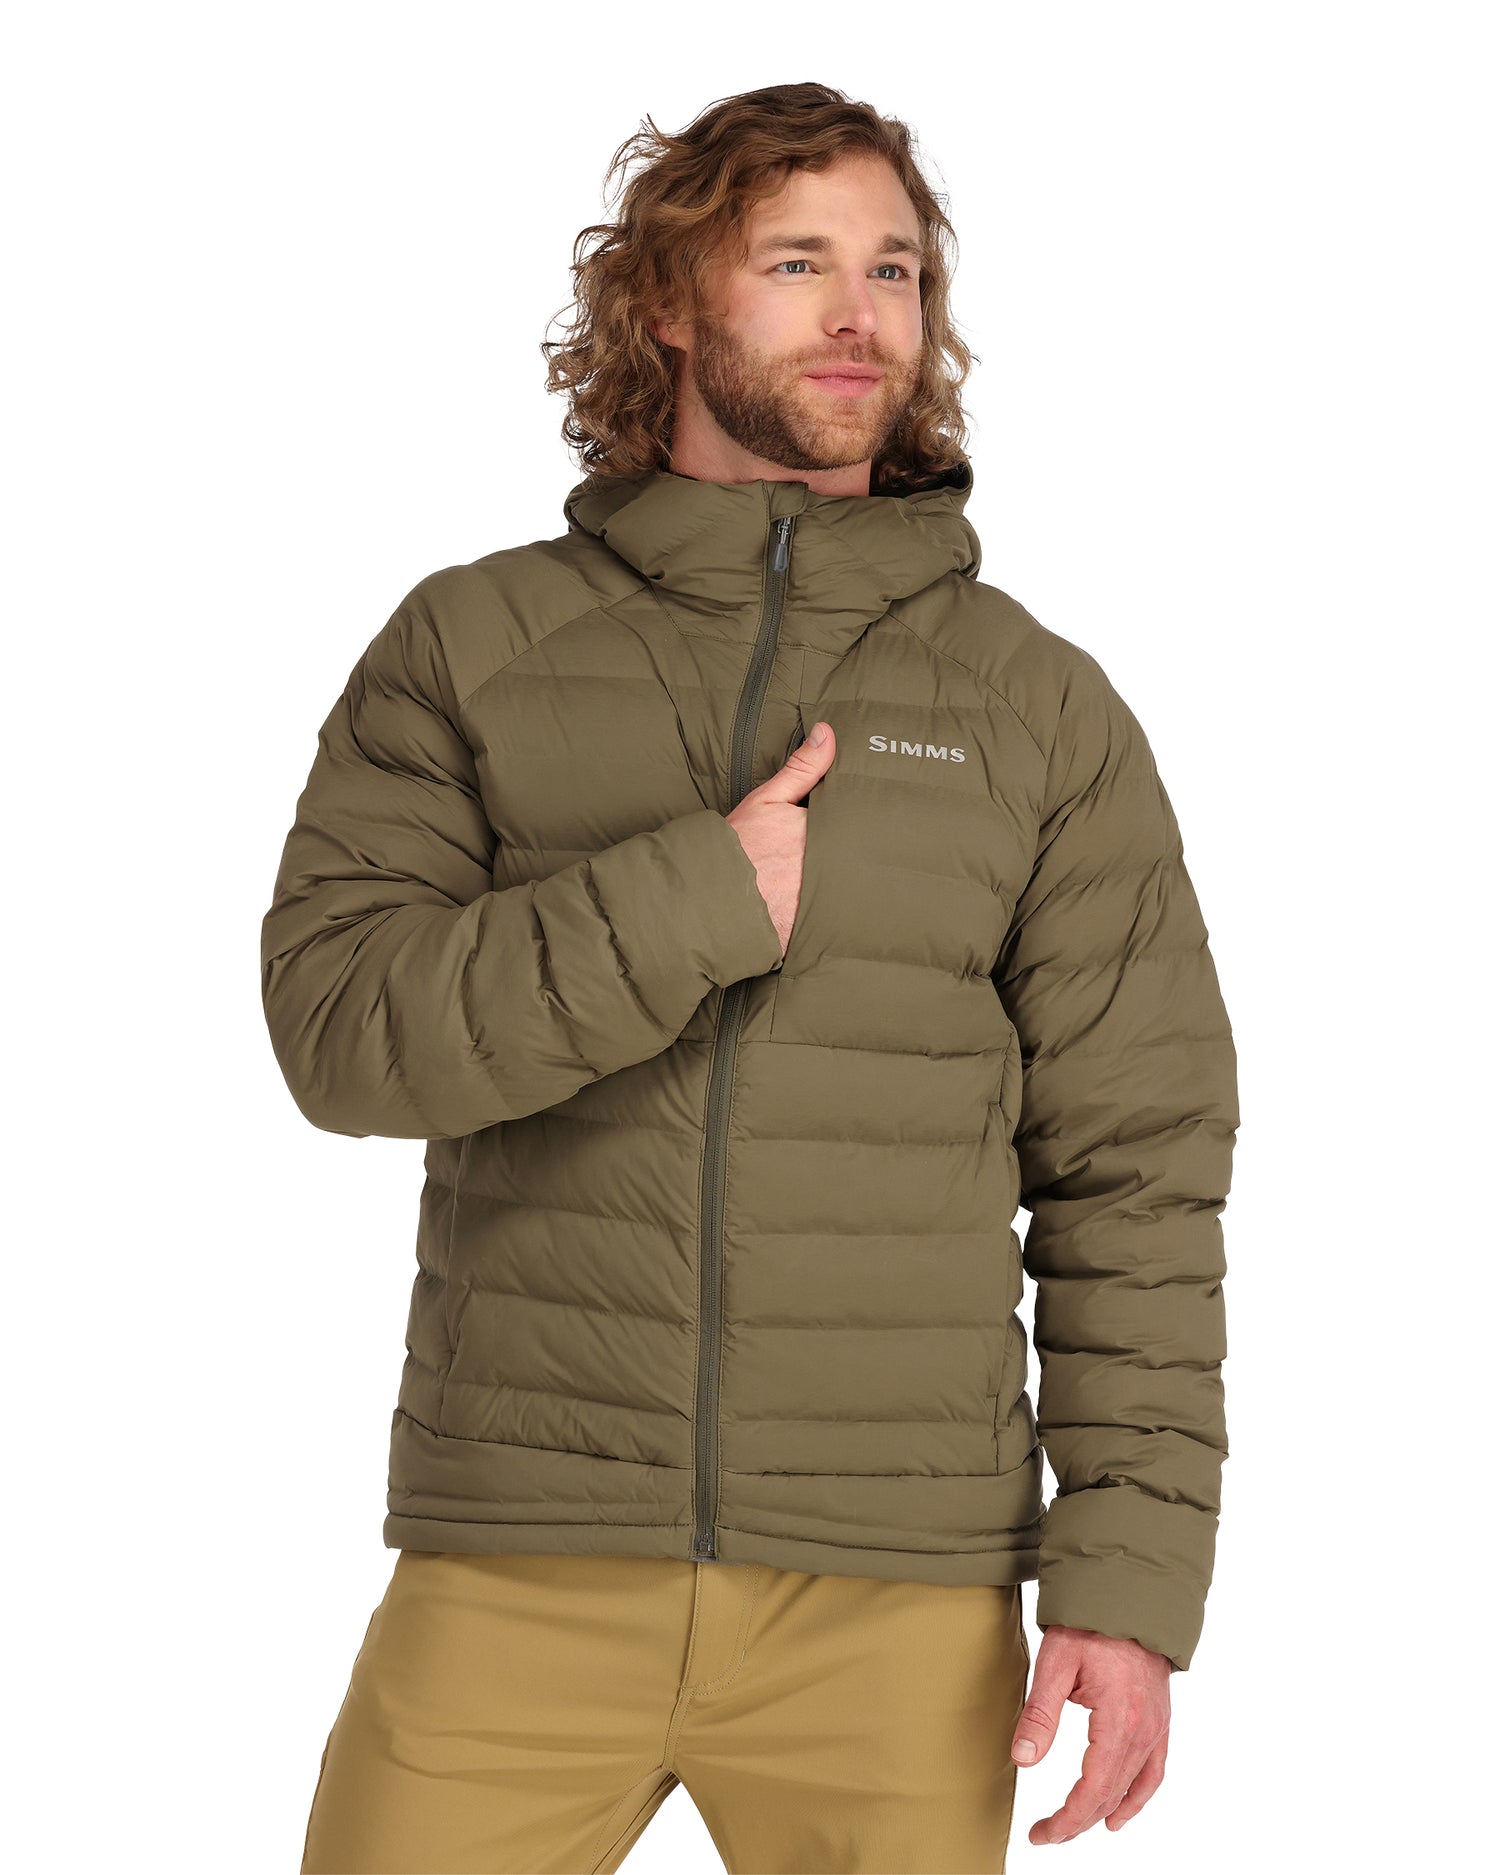 Exstream Hooded Jacket- On Body- front